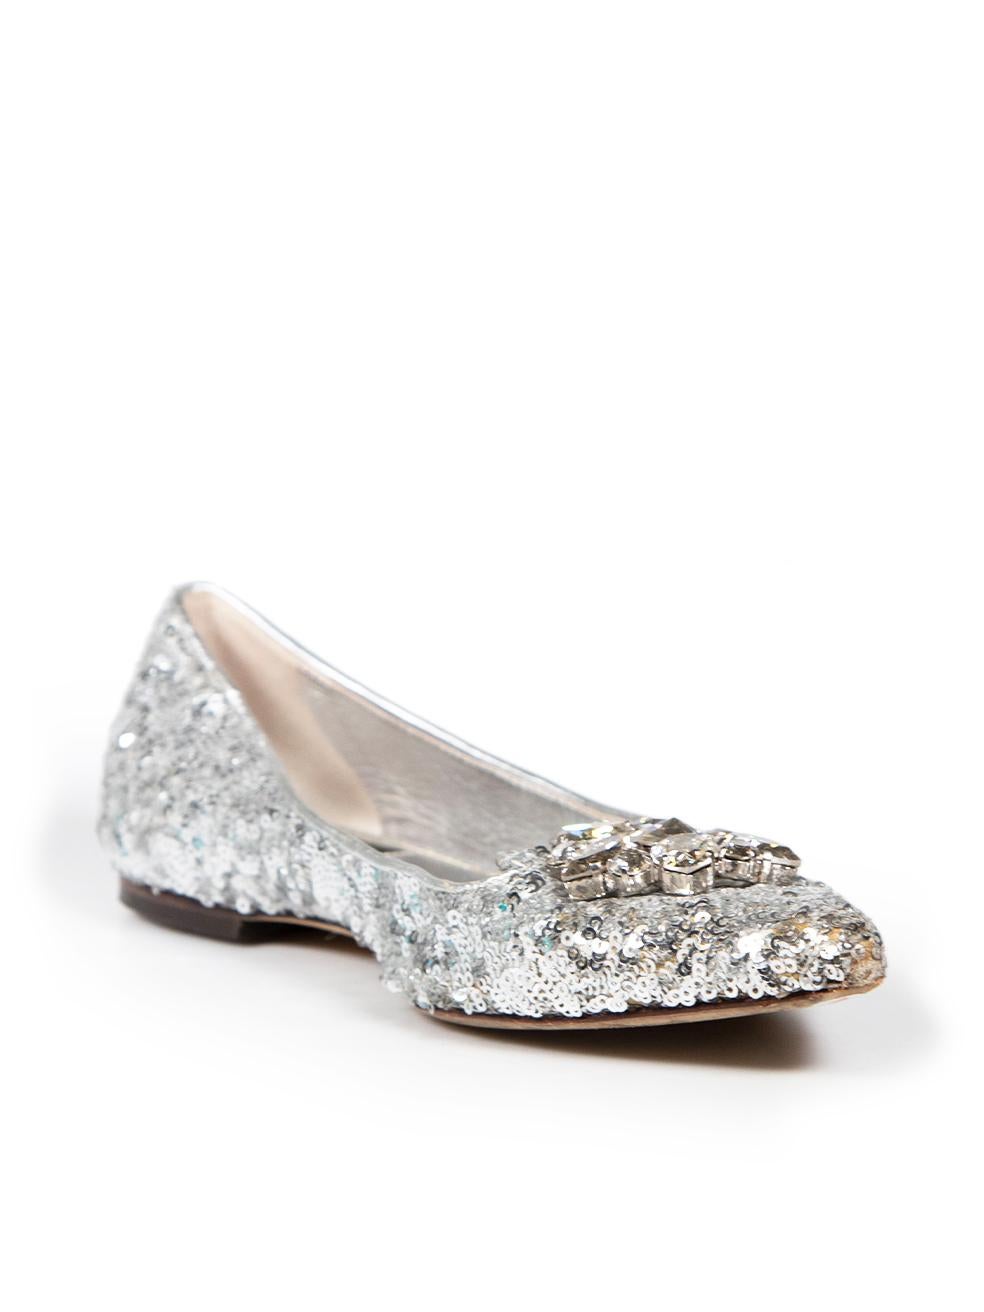 CONDITION is Very good. Minimal wear to flats is evident. Minimal wear to toe tips and general cracking and creasing to the leather insoles on this used Dolce & Gabbana designer resale item.
 
 
 
 Details
 
 
 Silver
 
 Glitter
 
 Flats
 
 Point